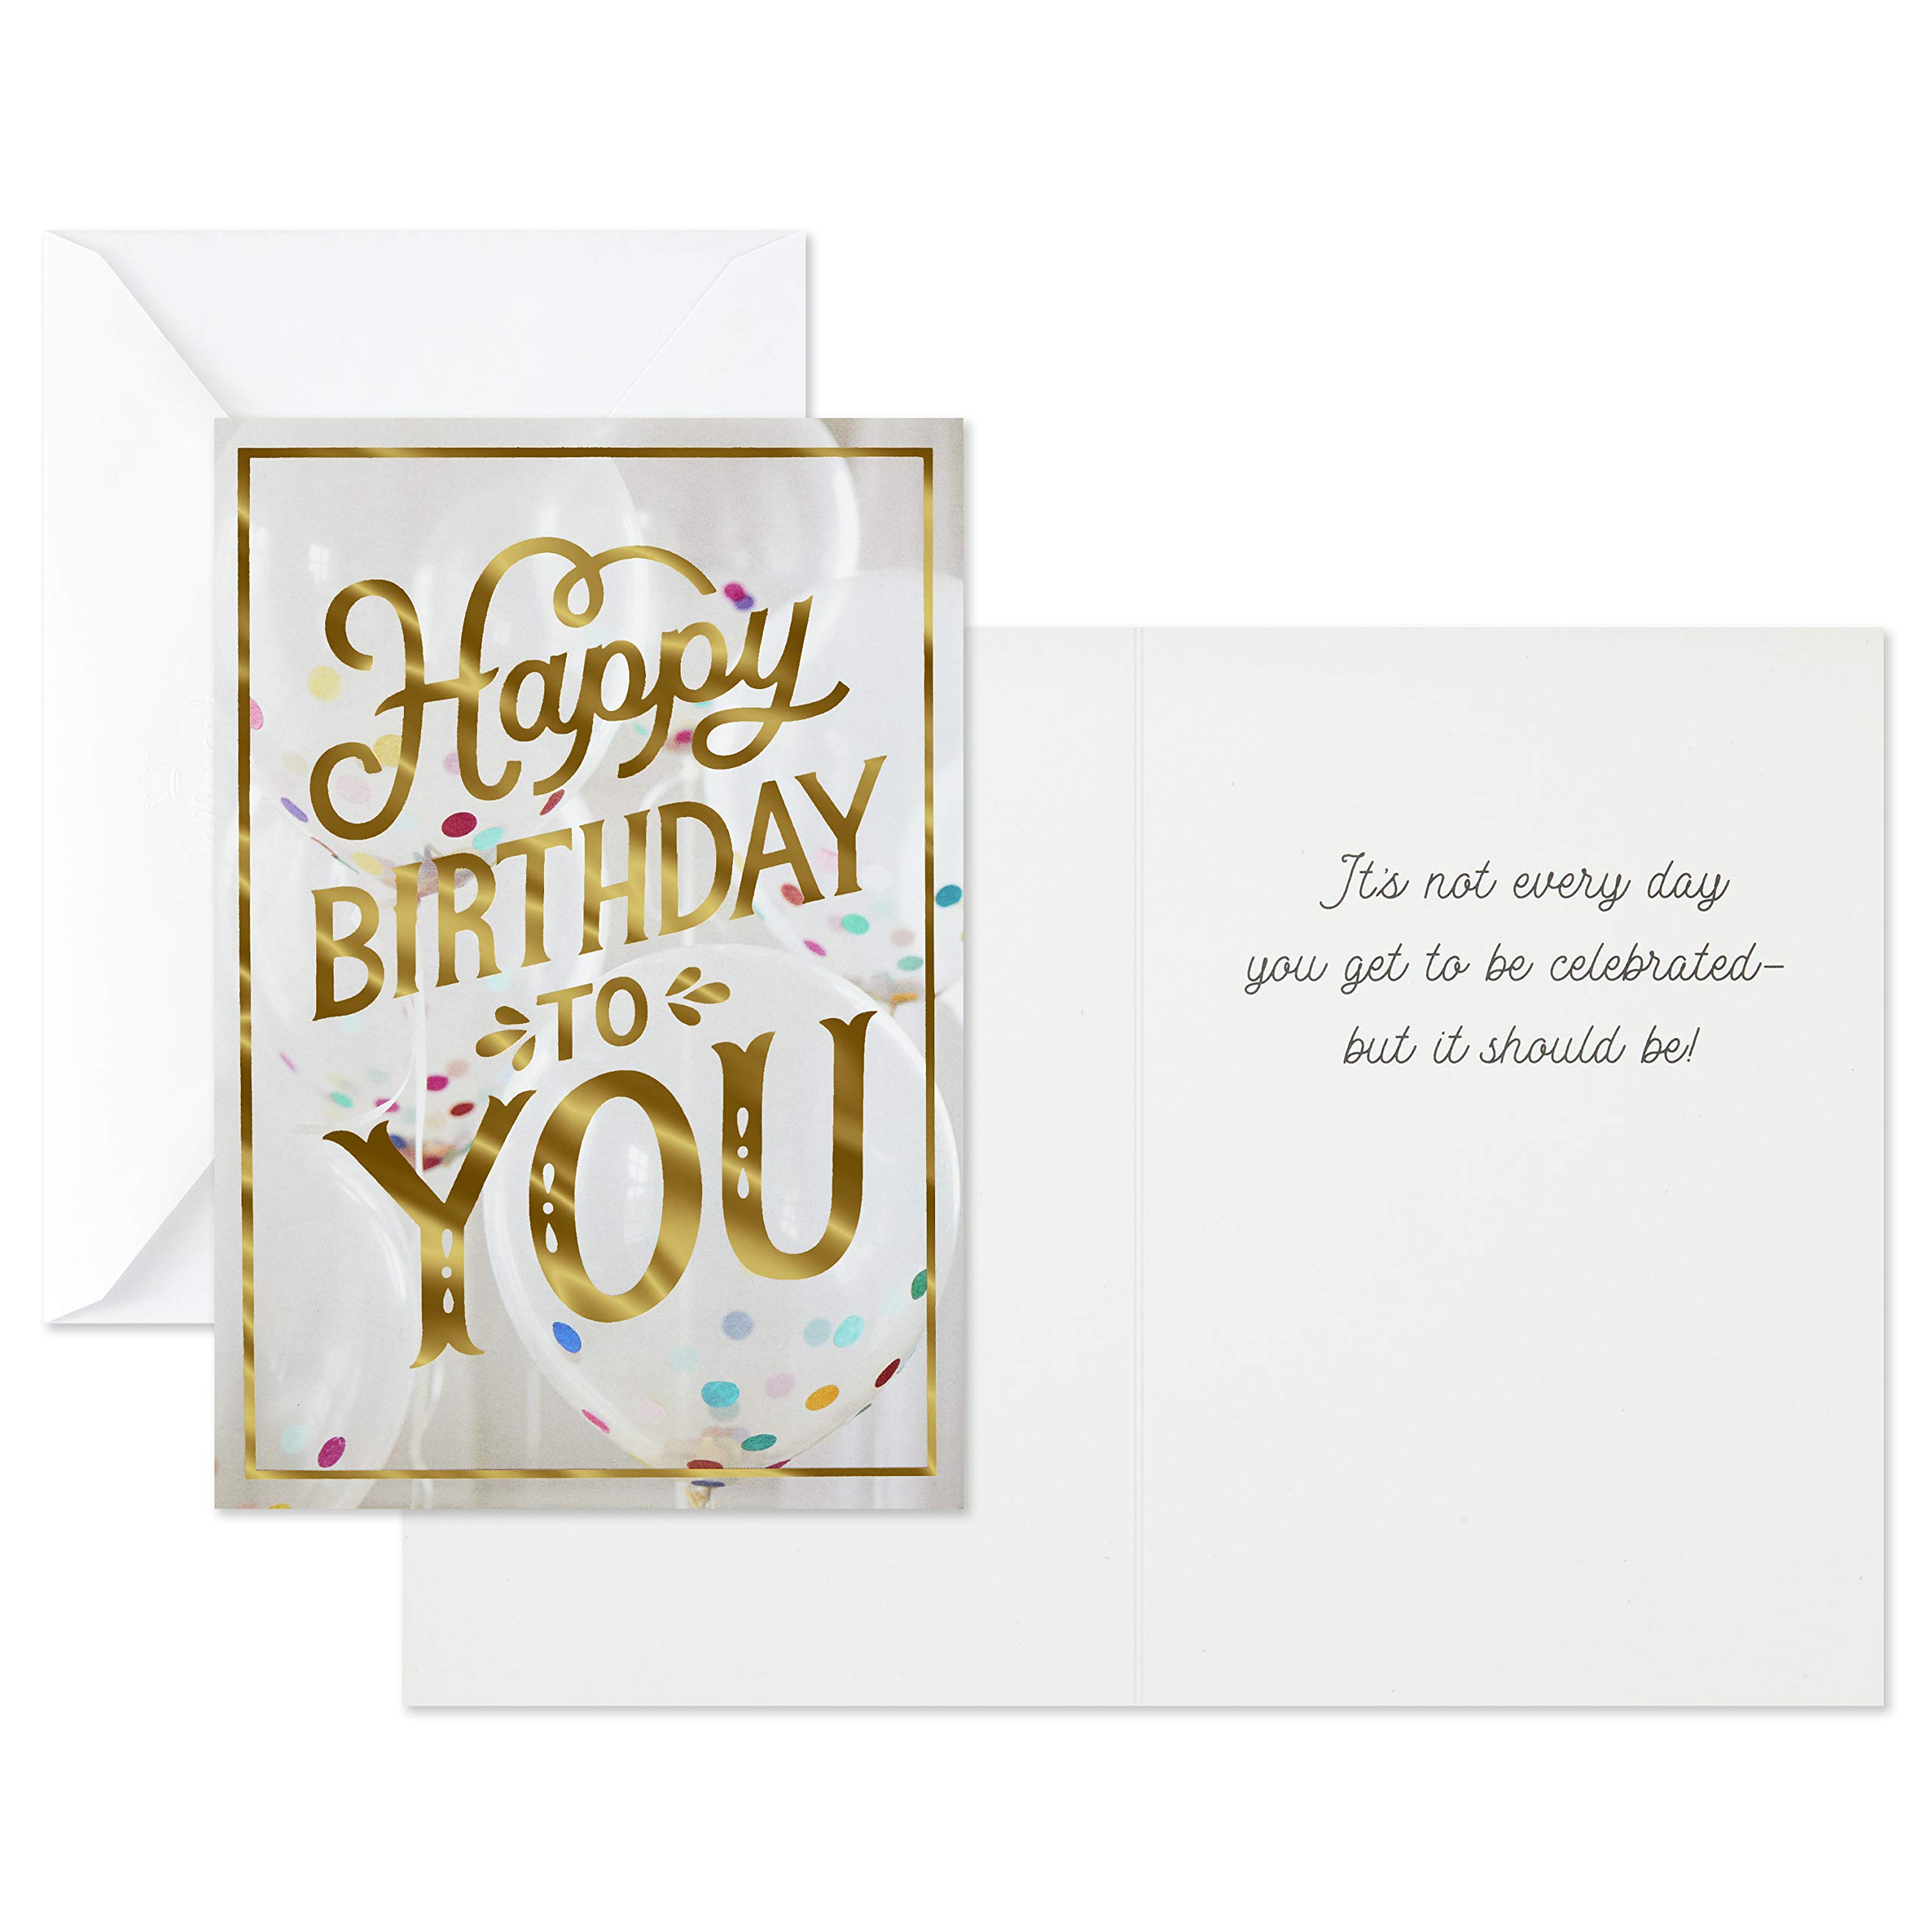 Hallmark Birthday Cards Assortment, Balloons, Cake, Flowers (12 Cards with Envelopes)